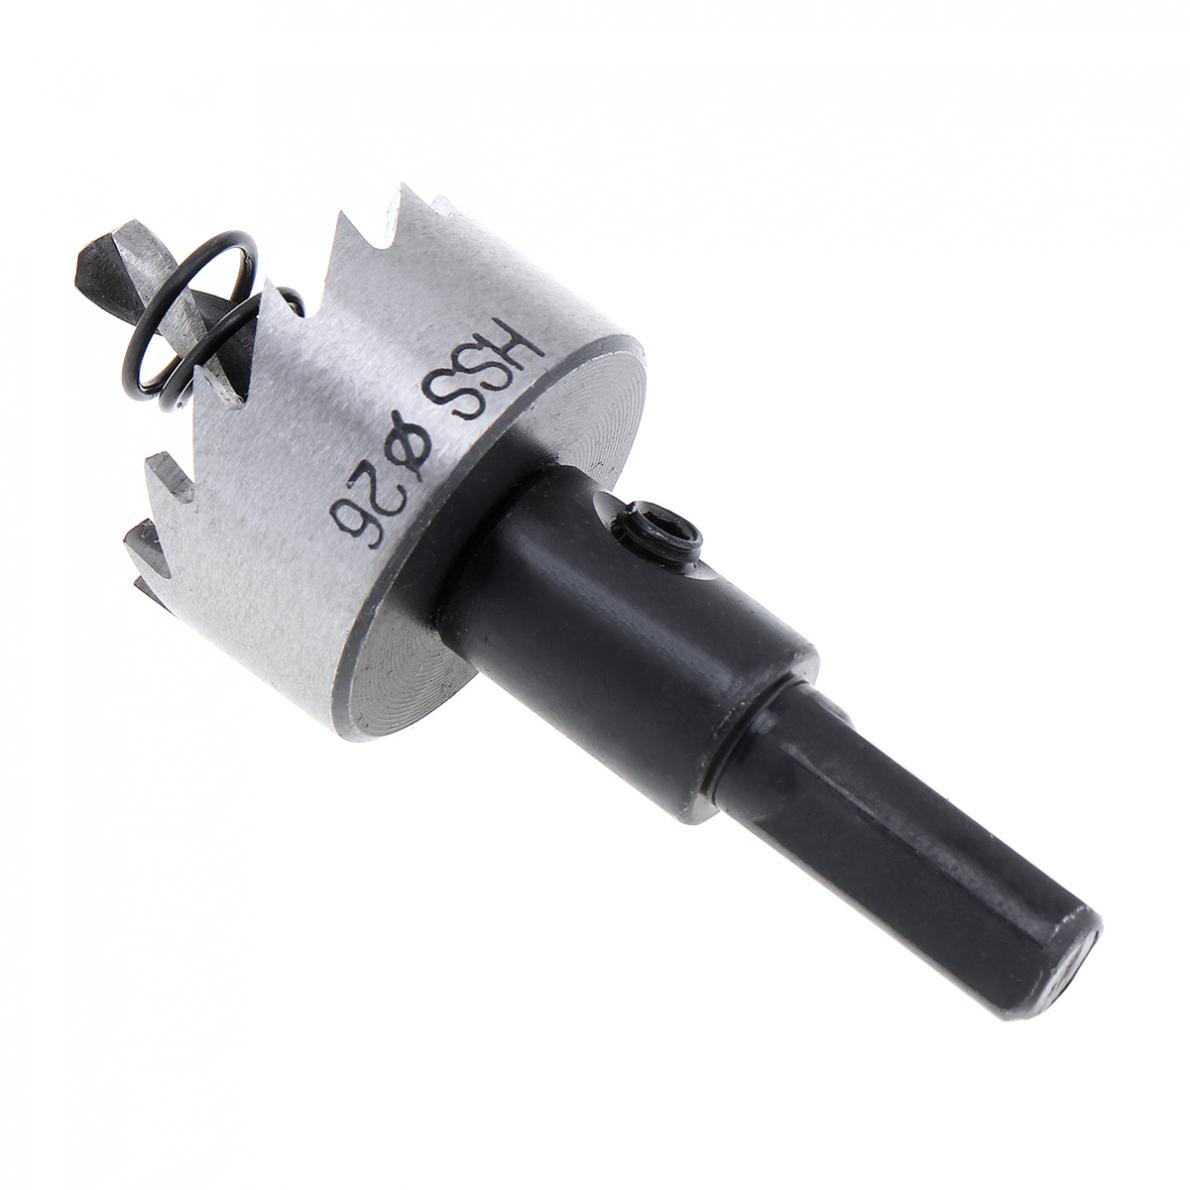 26mm Hole Saw Tooth HSS Steel Drill Bit Cutter Tool for Metal Alloy Iron plate